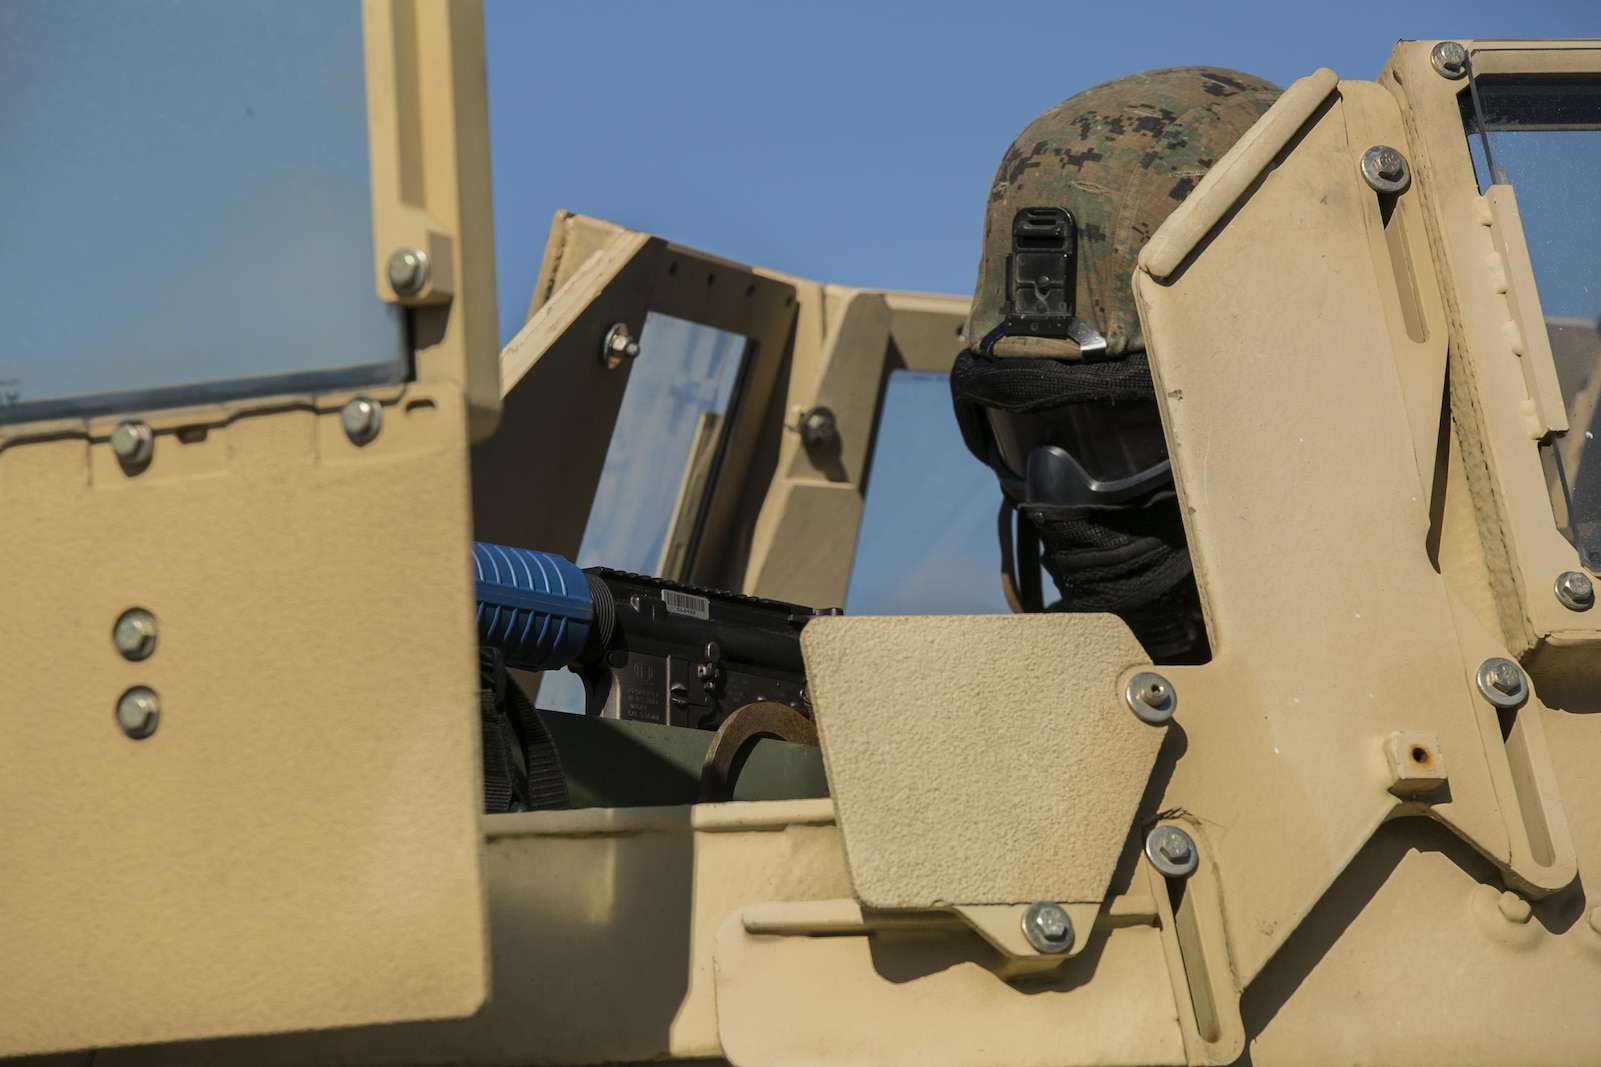 Marines with 2nd Law Enforcement Battalion stay vigilant as they drive through a village with possible hostiles and improvised explosive devices at Camp Lejeune, N.C., Feb. 9, 2016. During the time the Marines spent in the field, they encountered multiple obstacles and confronted different scenarios in preparation for an upcoming deployment with the 24th Marine Expeditionary Unit. The obstacles that they faced included rugged environments, improvised explosive devices and ambushes by the enemy. (U.S. Marine Corps photo by Lance Cpl. Luke Hoogendam/Released)